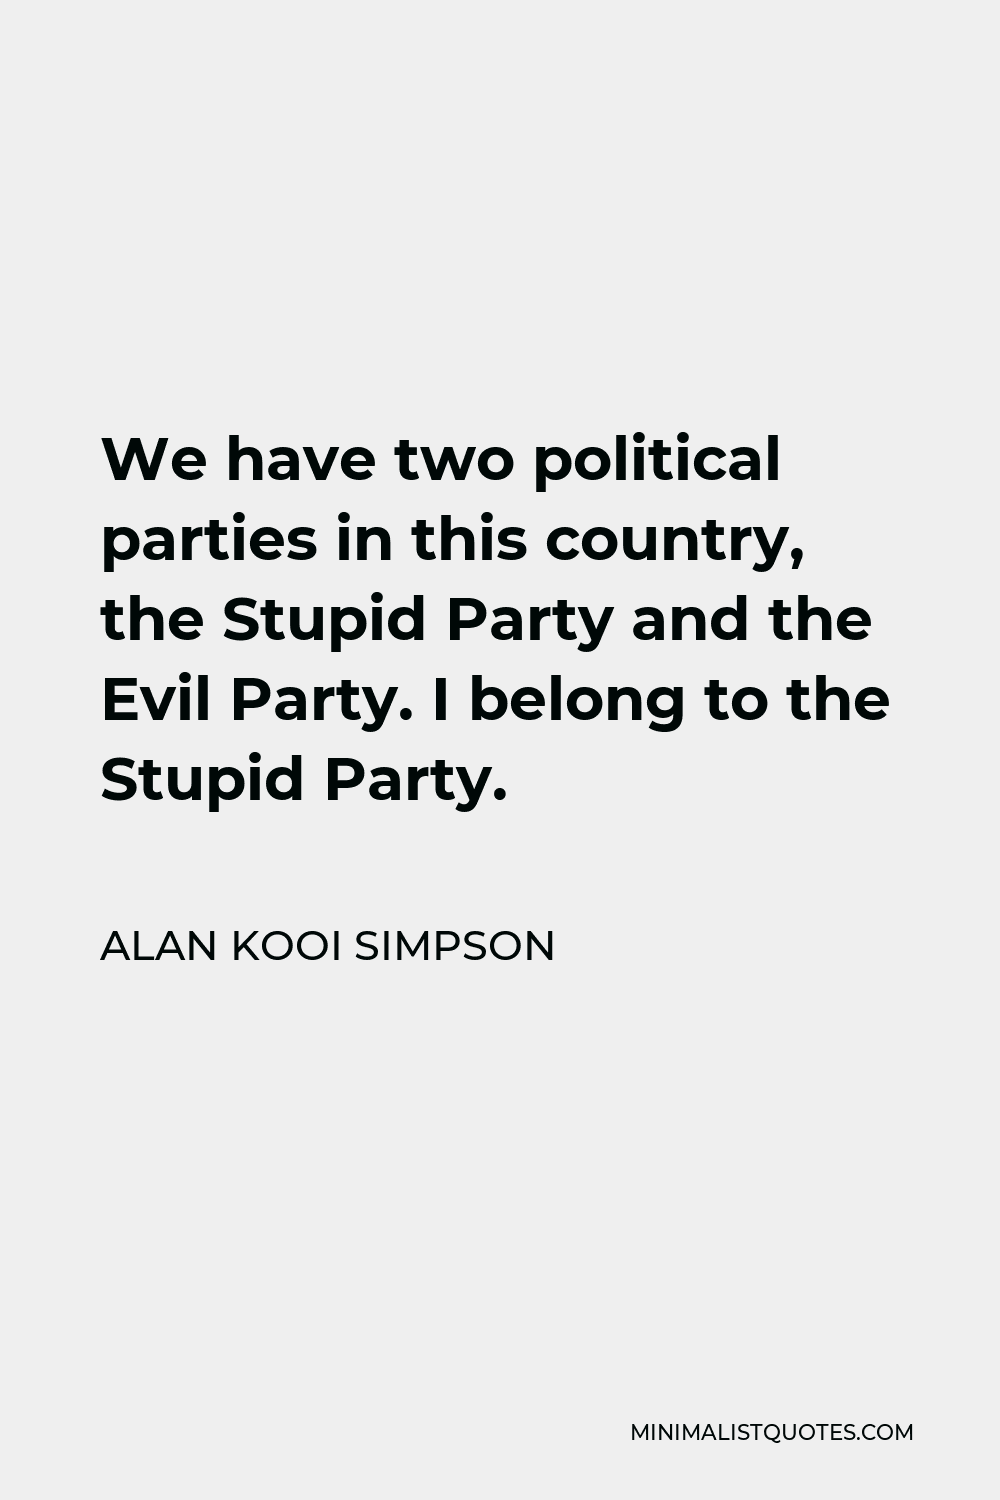 Alan Kooi Simpson Quote - We have two political parties in this country, the Stupid Party and the Evil Party. I belong to the Stupid Party.